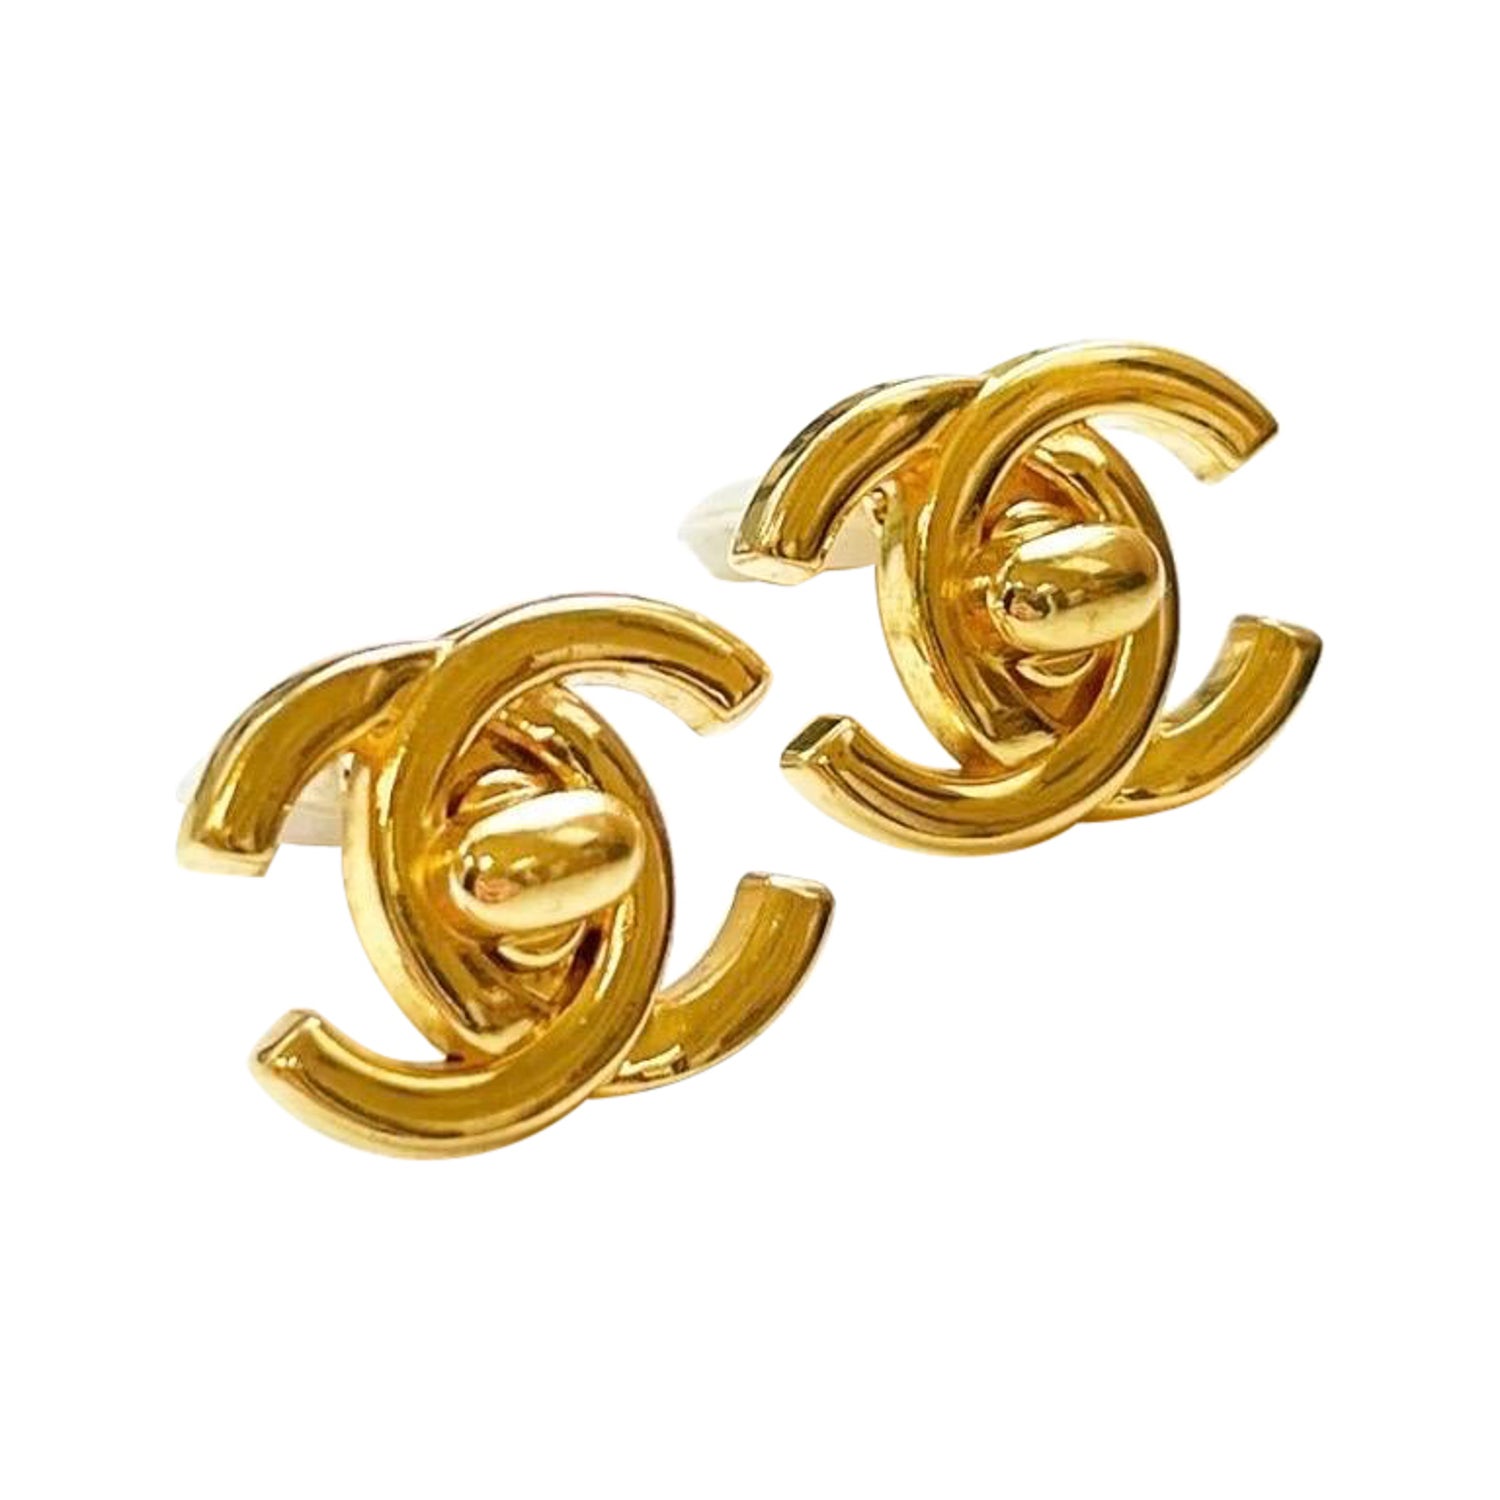 Chanel Black Circle Logo Clip on Earrings (Late 1980s / Early 90s)